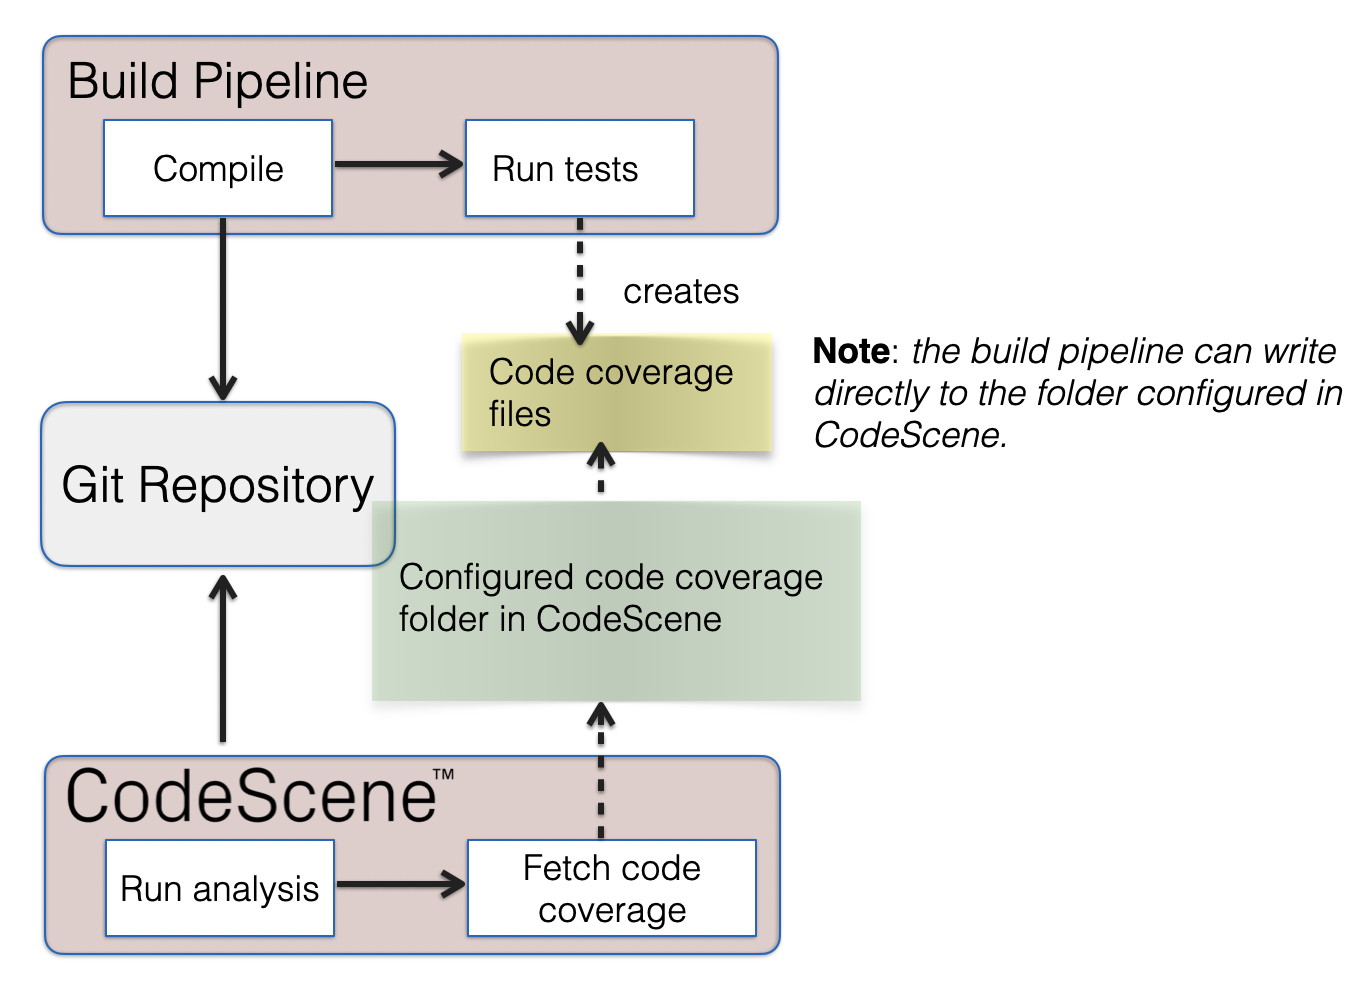 The coverage results are generated as part of a build pipeline and shared with CodeScene.